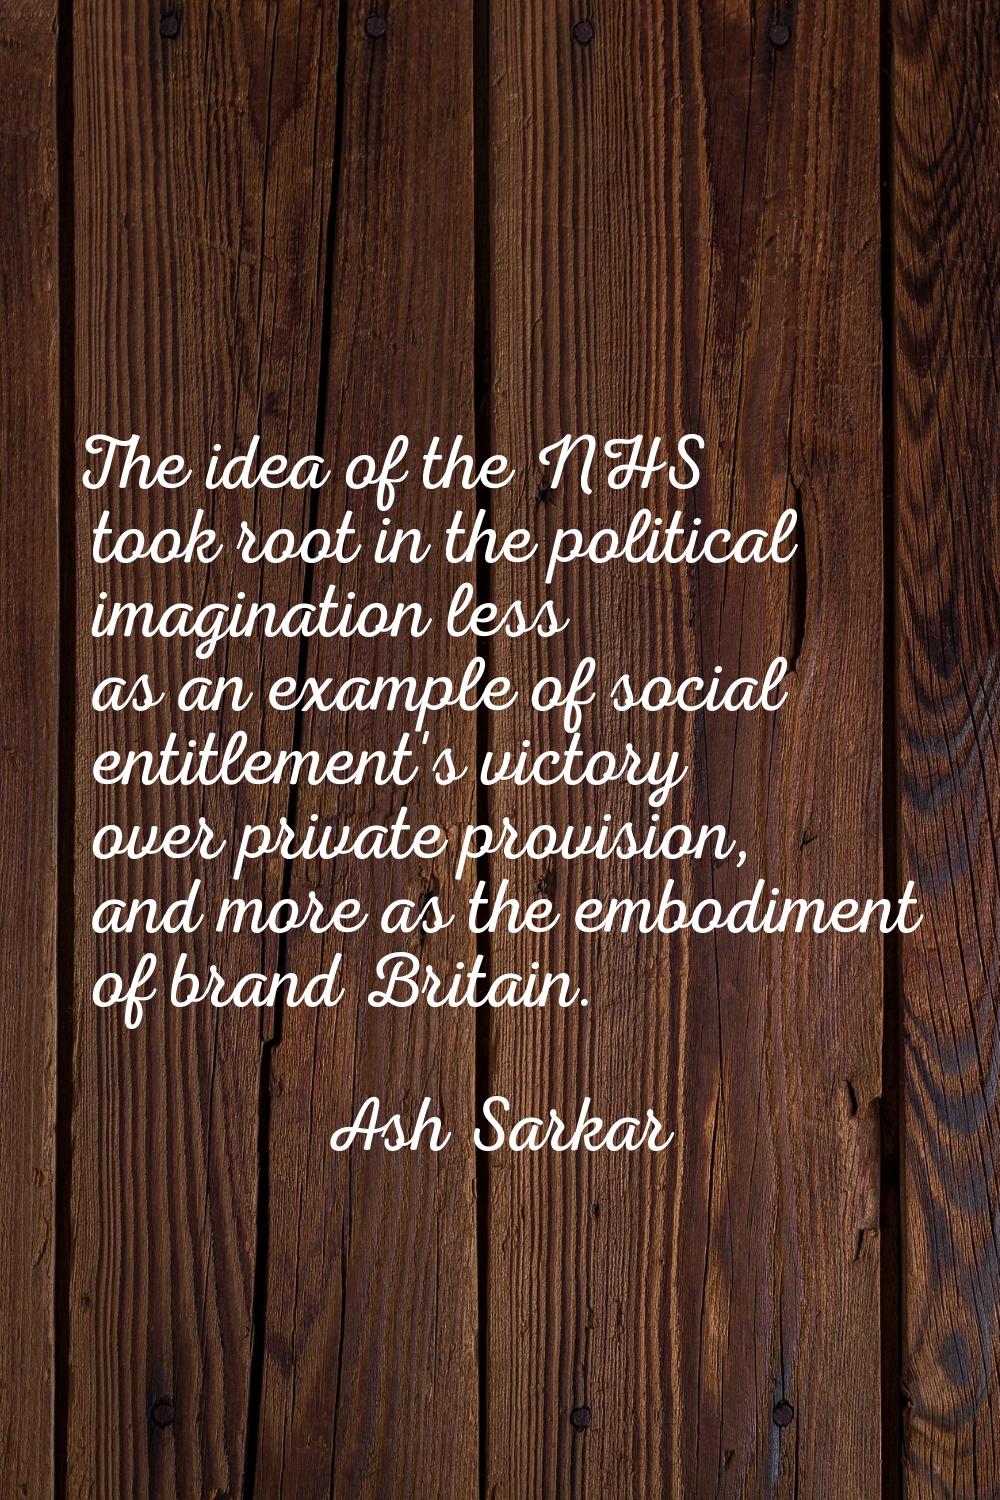 The idea of the NHS took root in the political imagination less as an example of social entitlement